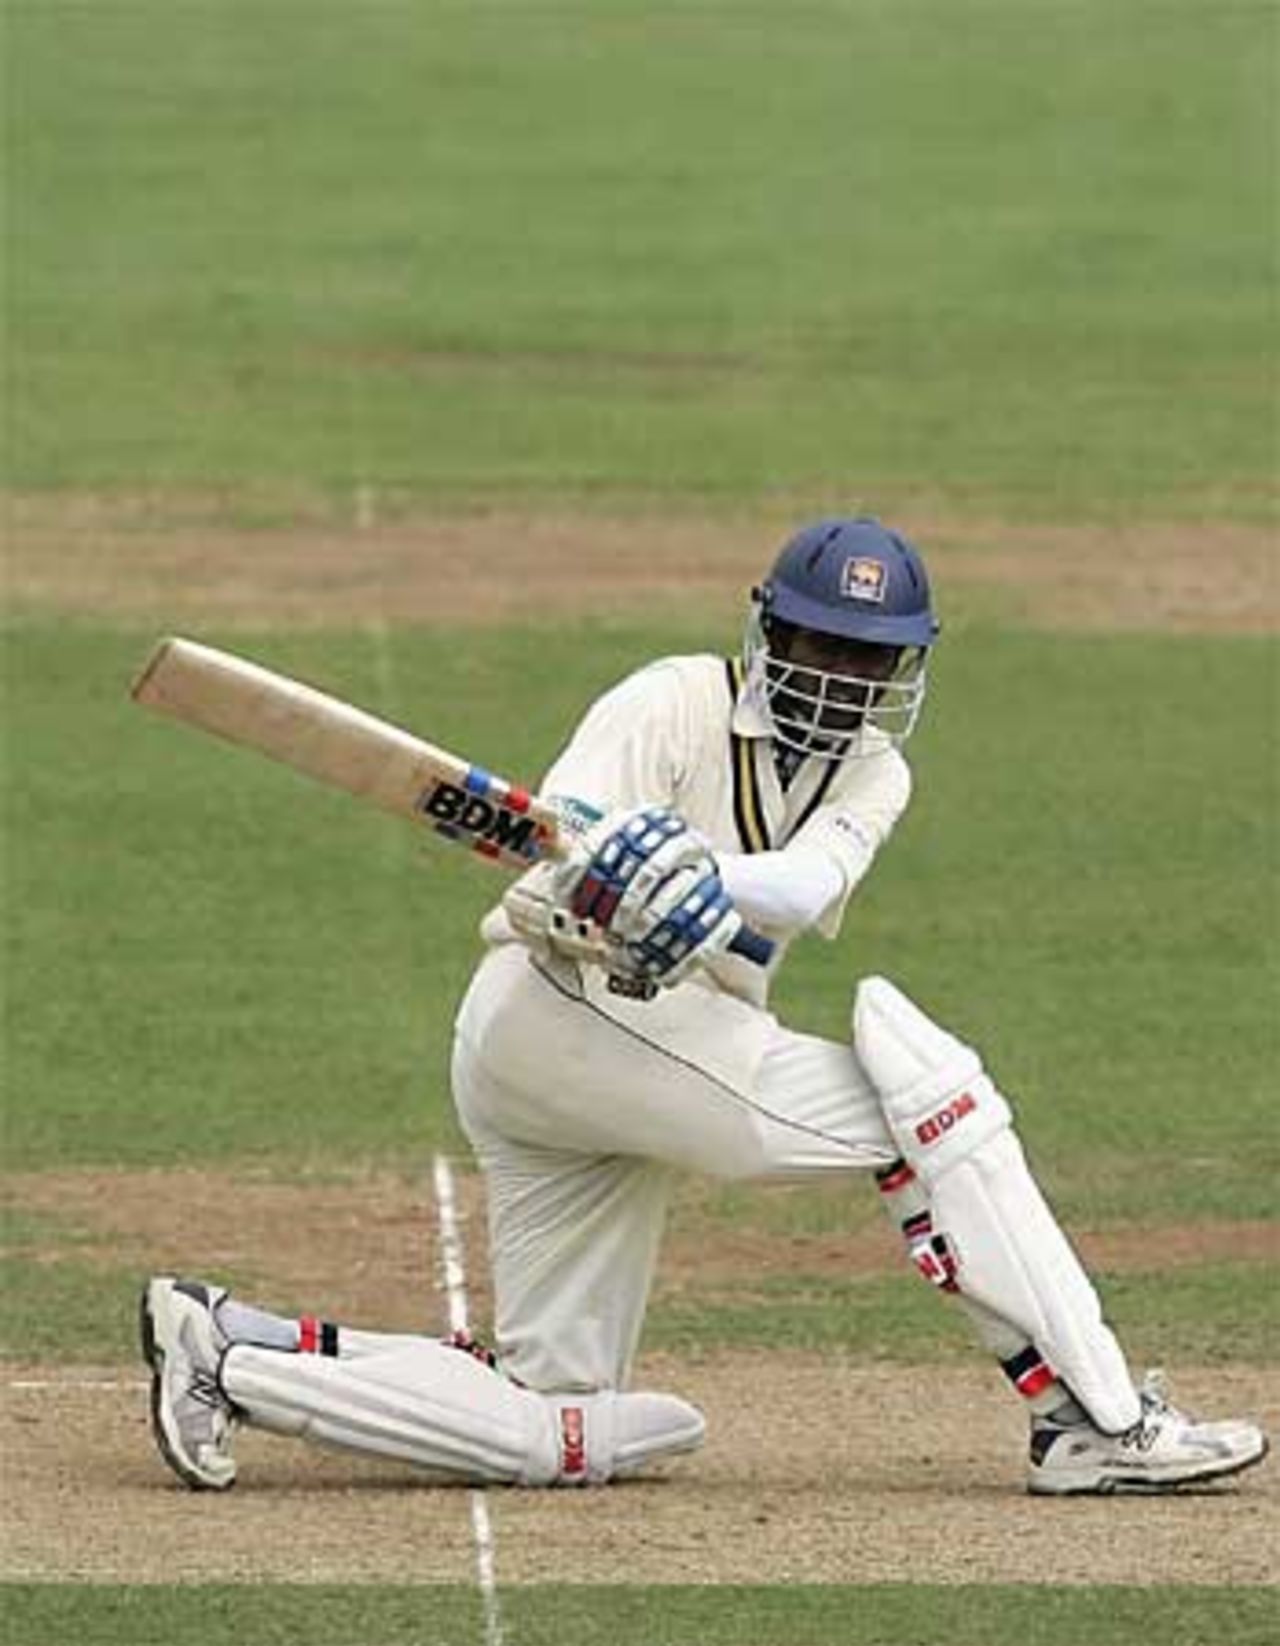 Upul Tharanga sweeps along untroubled during his hundred, Sussex v Sri Lanka, Hove, May 18, 2006